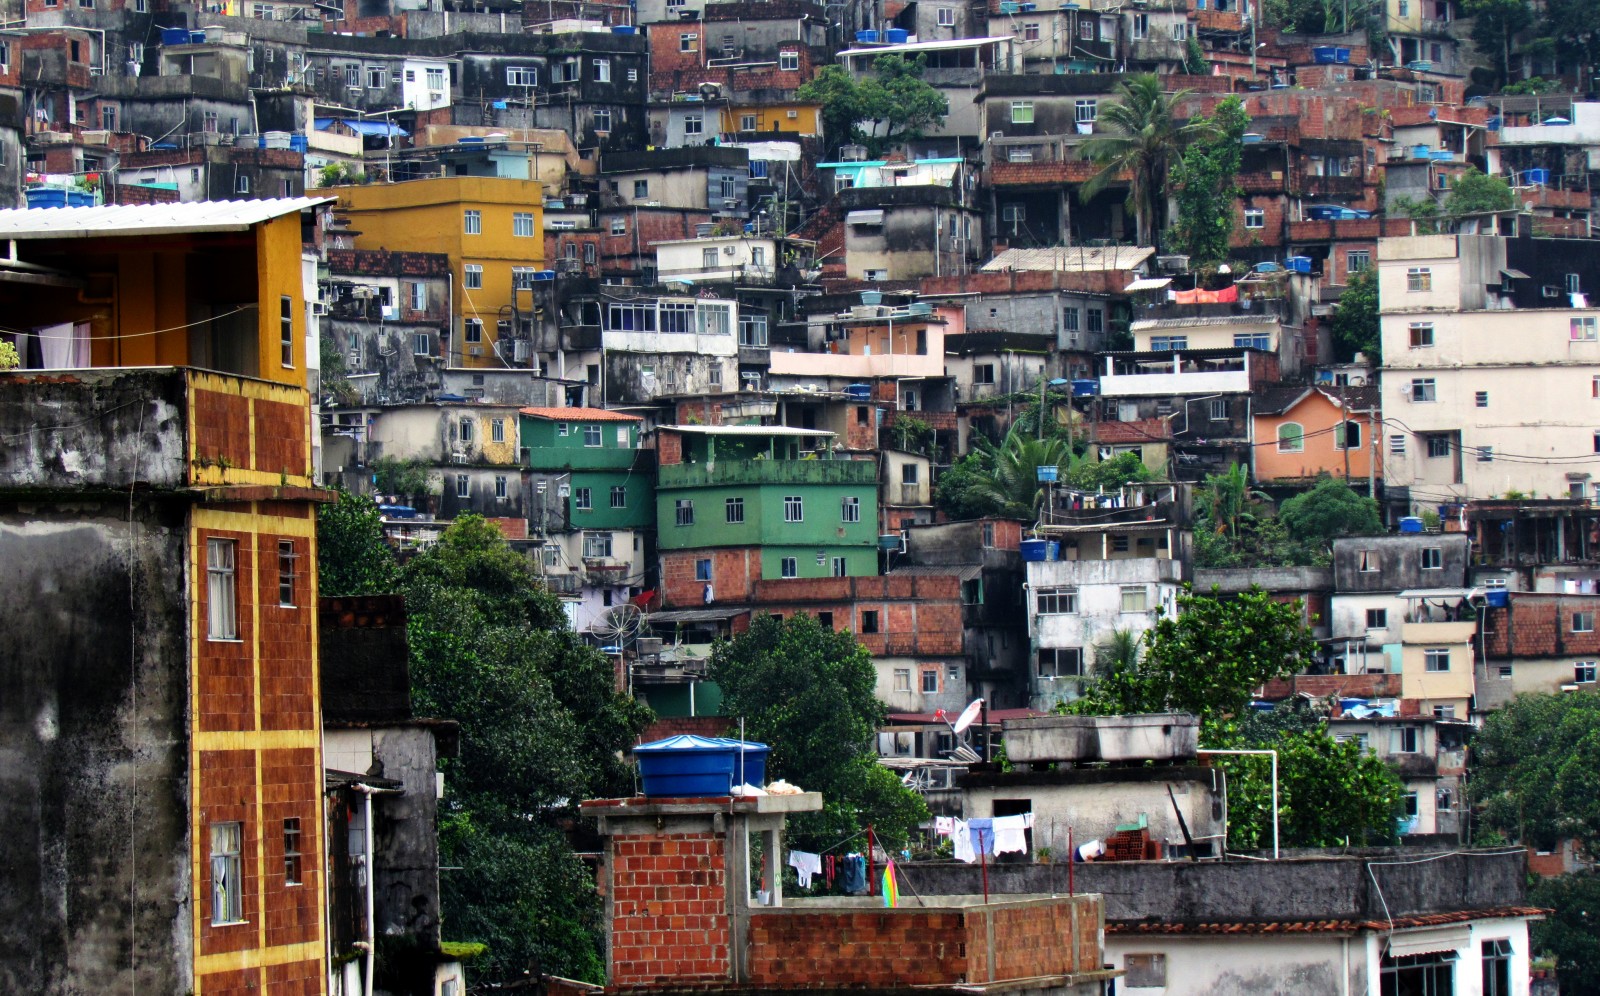 Rio de Janeiro's sprawling favelas often lack access to adequate water and sewage services, compounding pollution problems in Guanabara Bay. Photo courtesy David Berkowitz via Flickr Creative Commons 